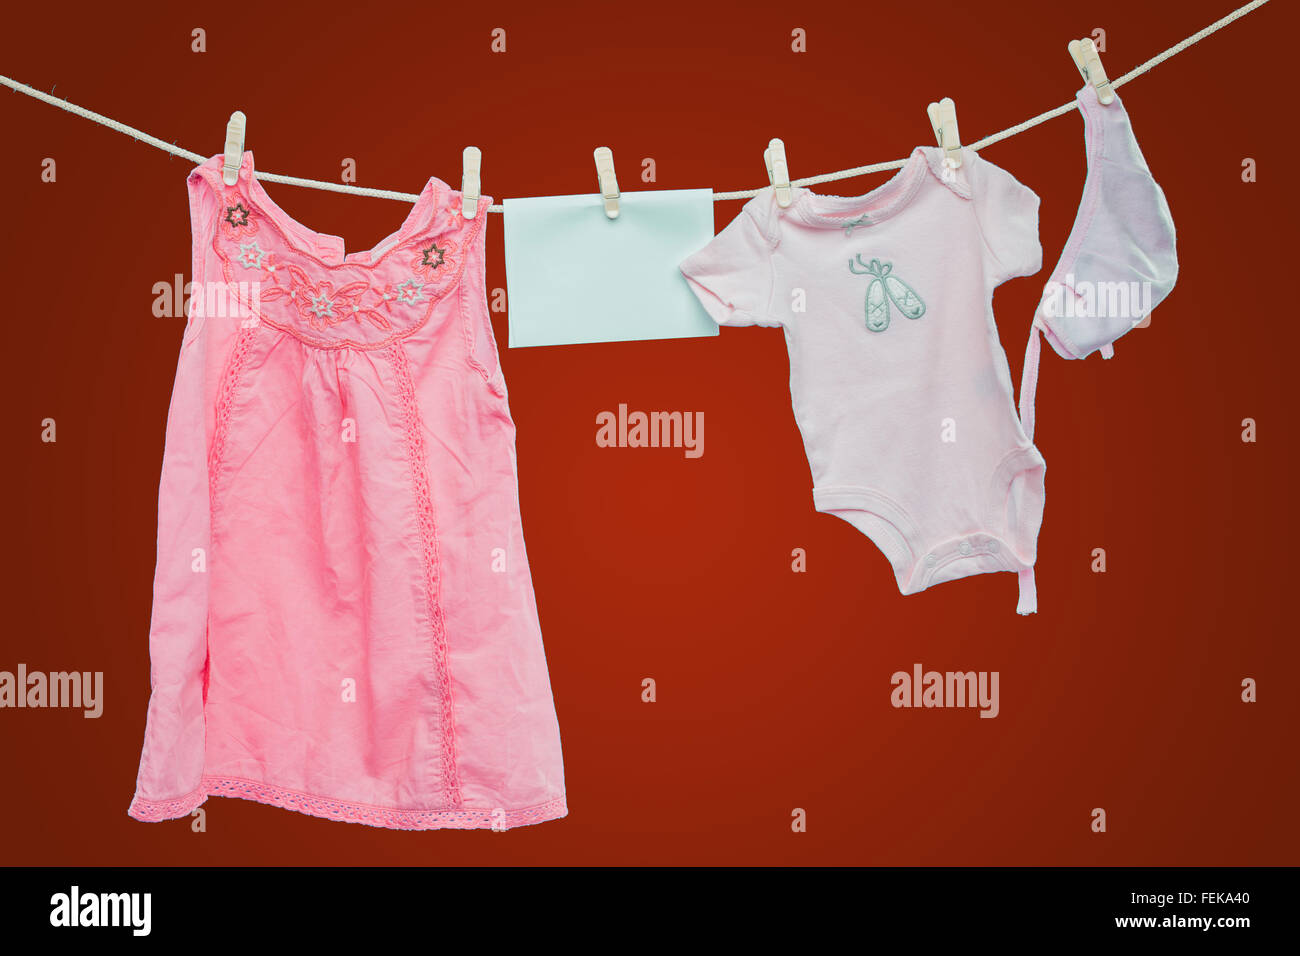 Baby goods hanging on the clothesline on red background Stock Photo